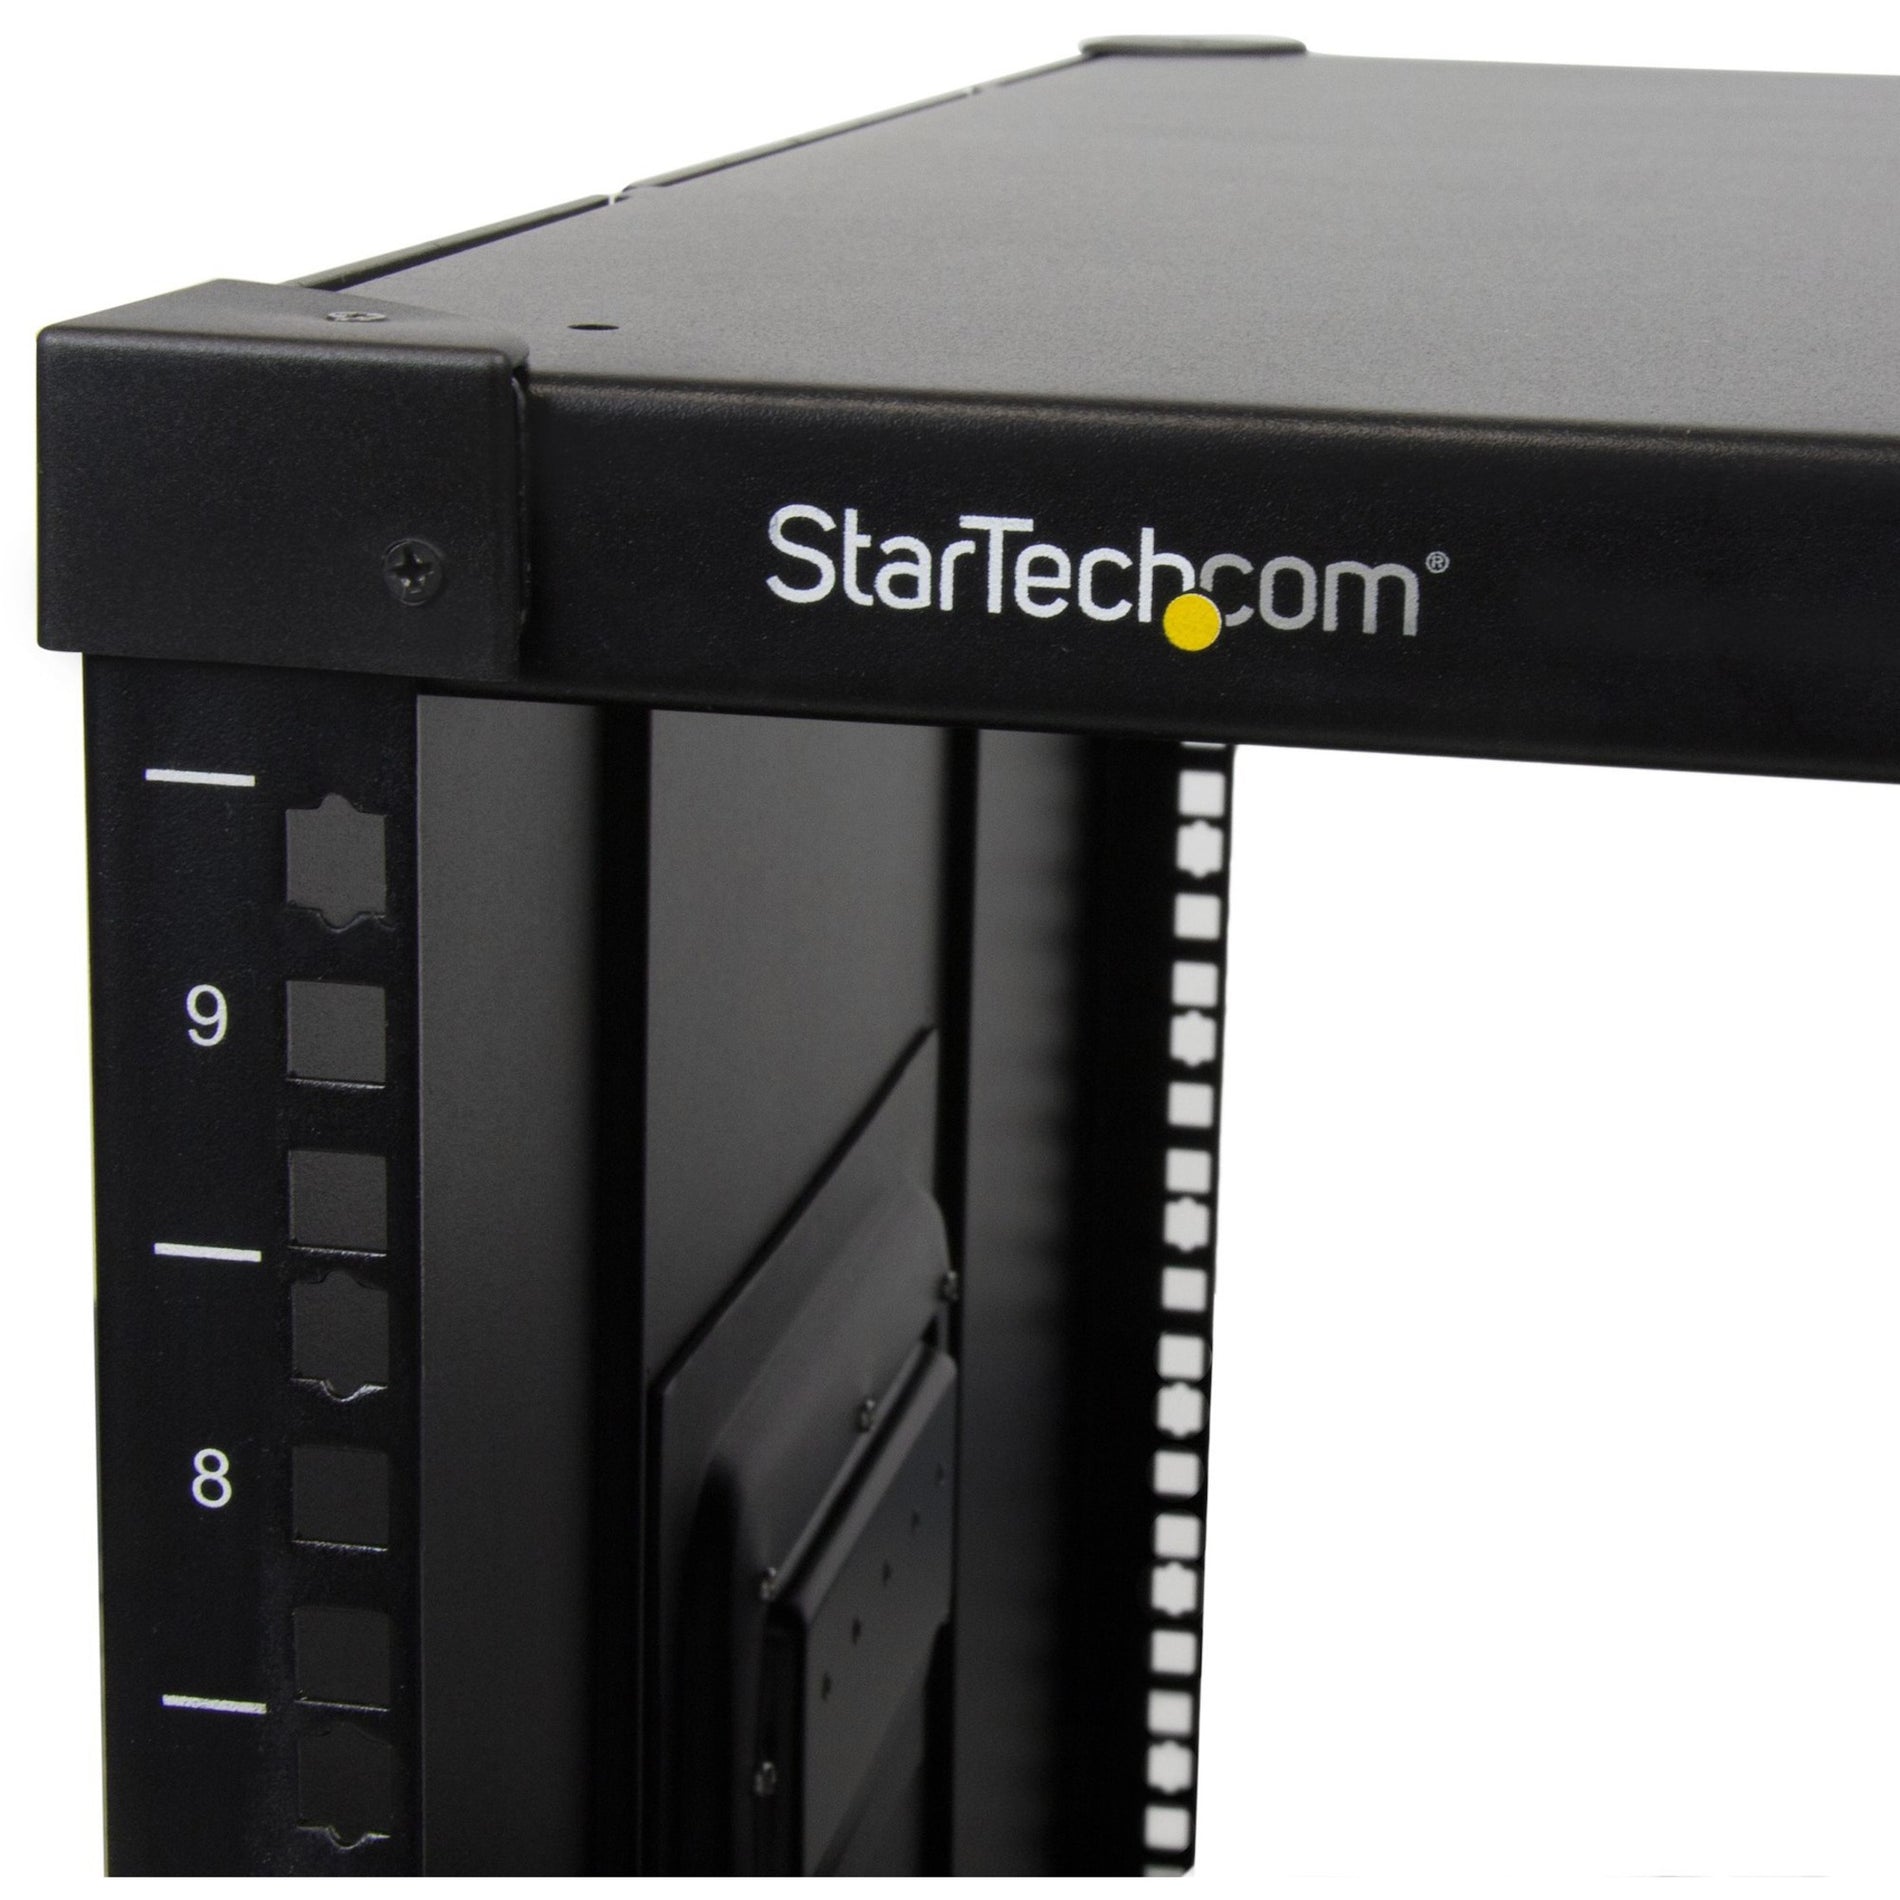 StarTech.com RK960CP Portable Server Rack with Handles - Rolling Cabinet - 9U, Easy Assembly, Casters, Black